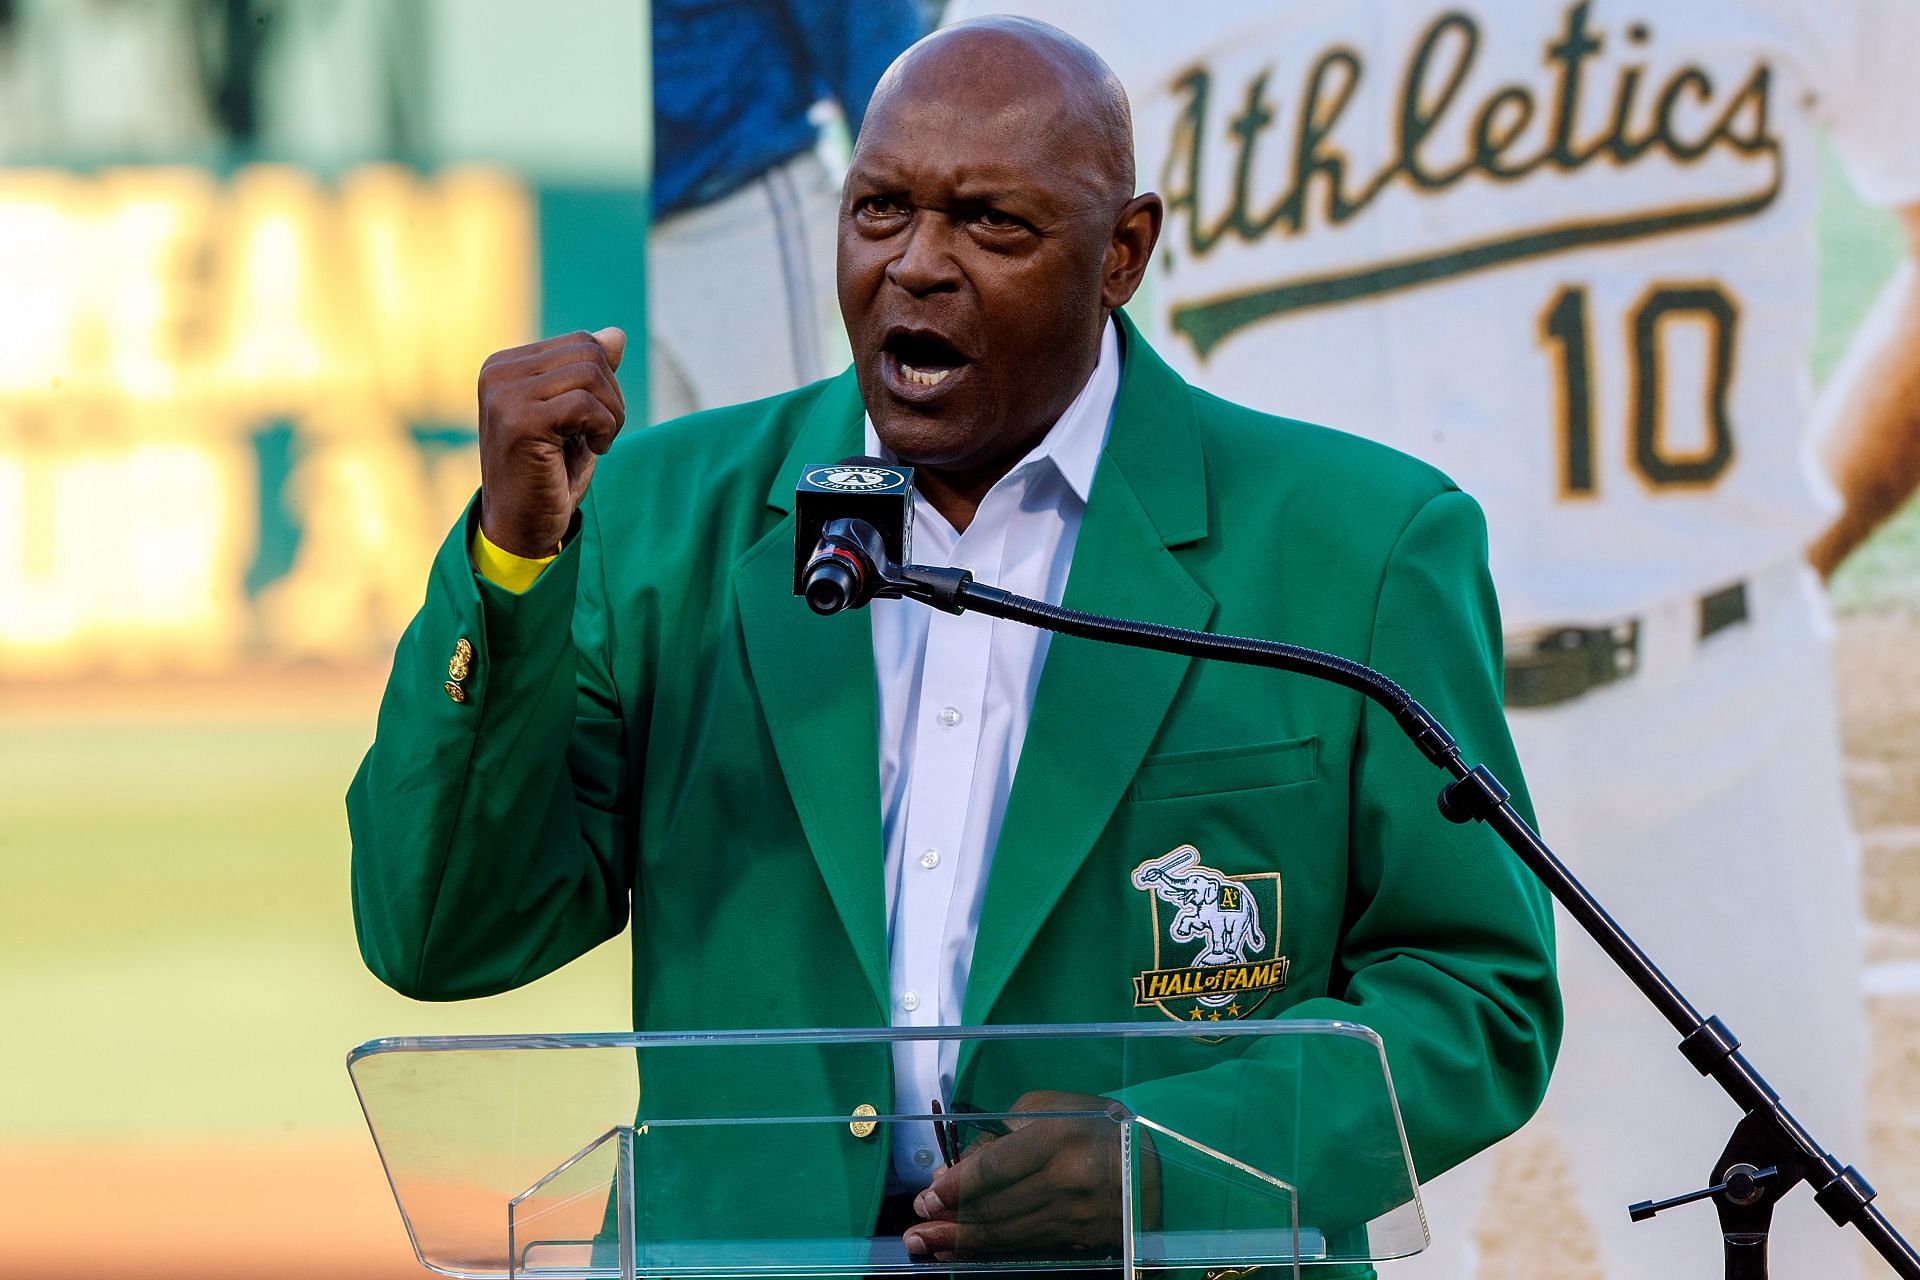 Former pitcher Vida Blue of the Oakland Athletics speaks as he is inducted into the team&#039;s Hall of Fame at the RingCentral Coliseum on September 21, 2019 in Oakland, California. (Photo by Jason O. Watson/Getty Images)